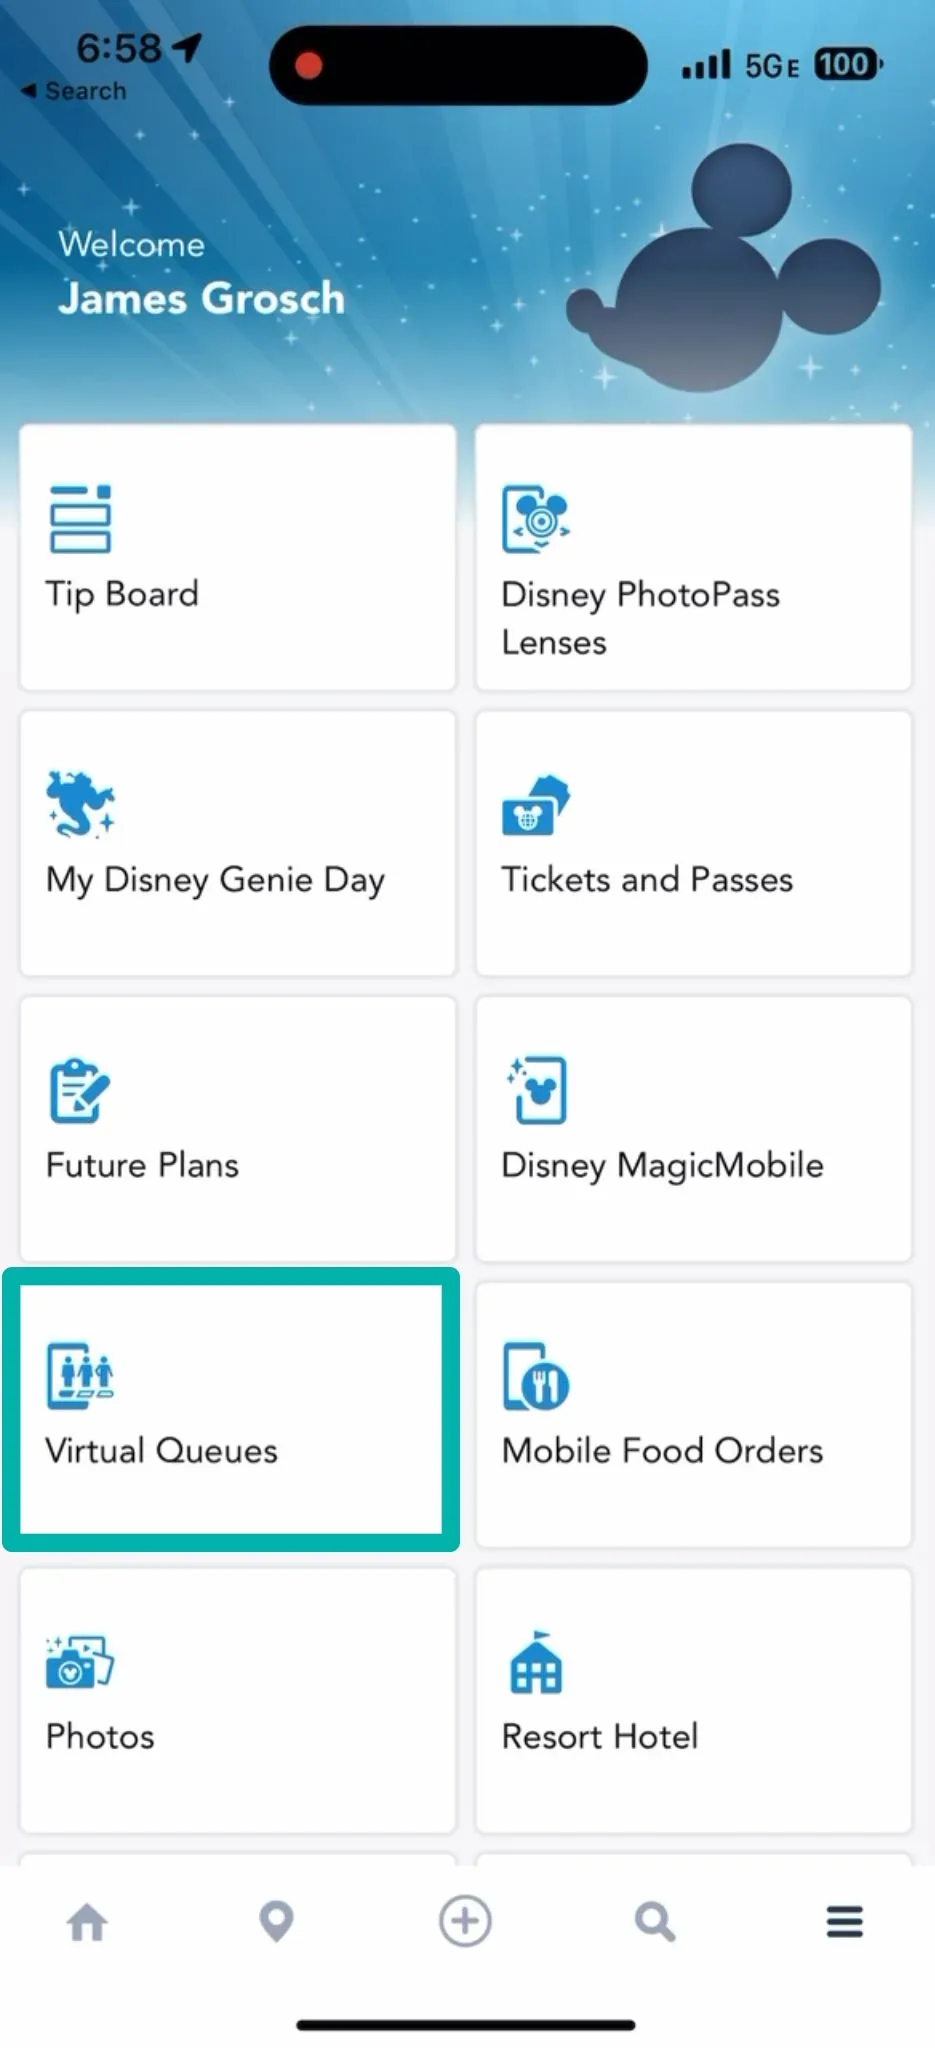 Best Way to Join the Virtual Queue at Disney World - How To